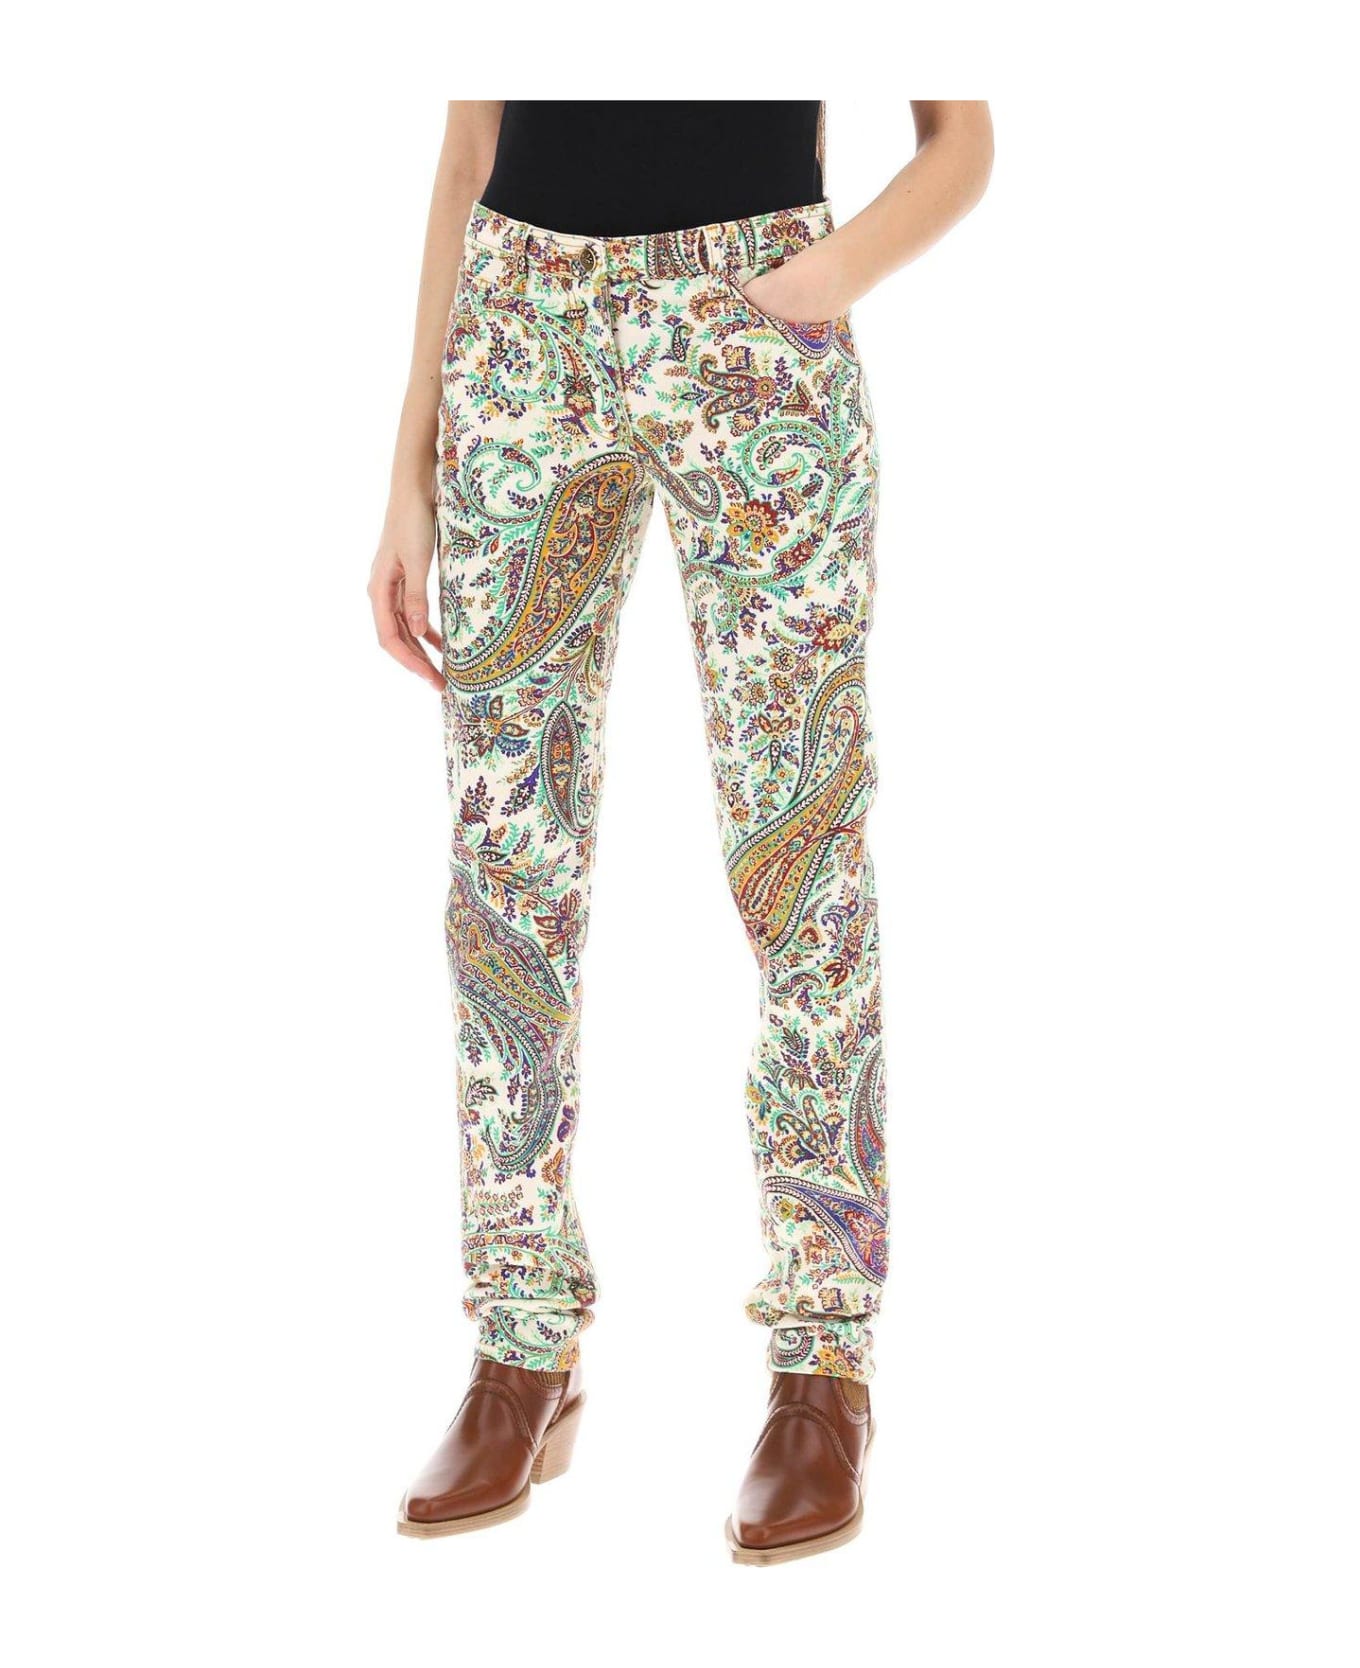 Etro Paisley-printed High-waist Stretched Jeans - STAMPA FDO BIANCO (White)